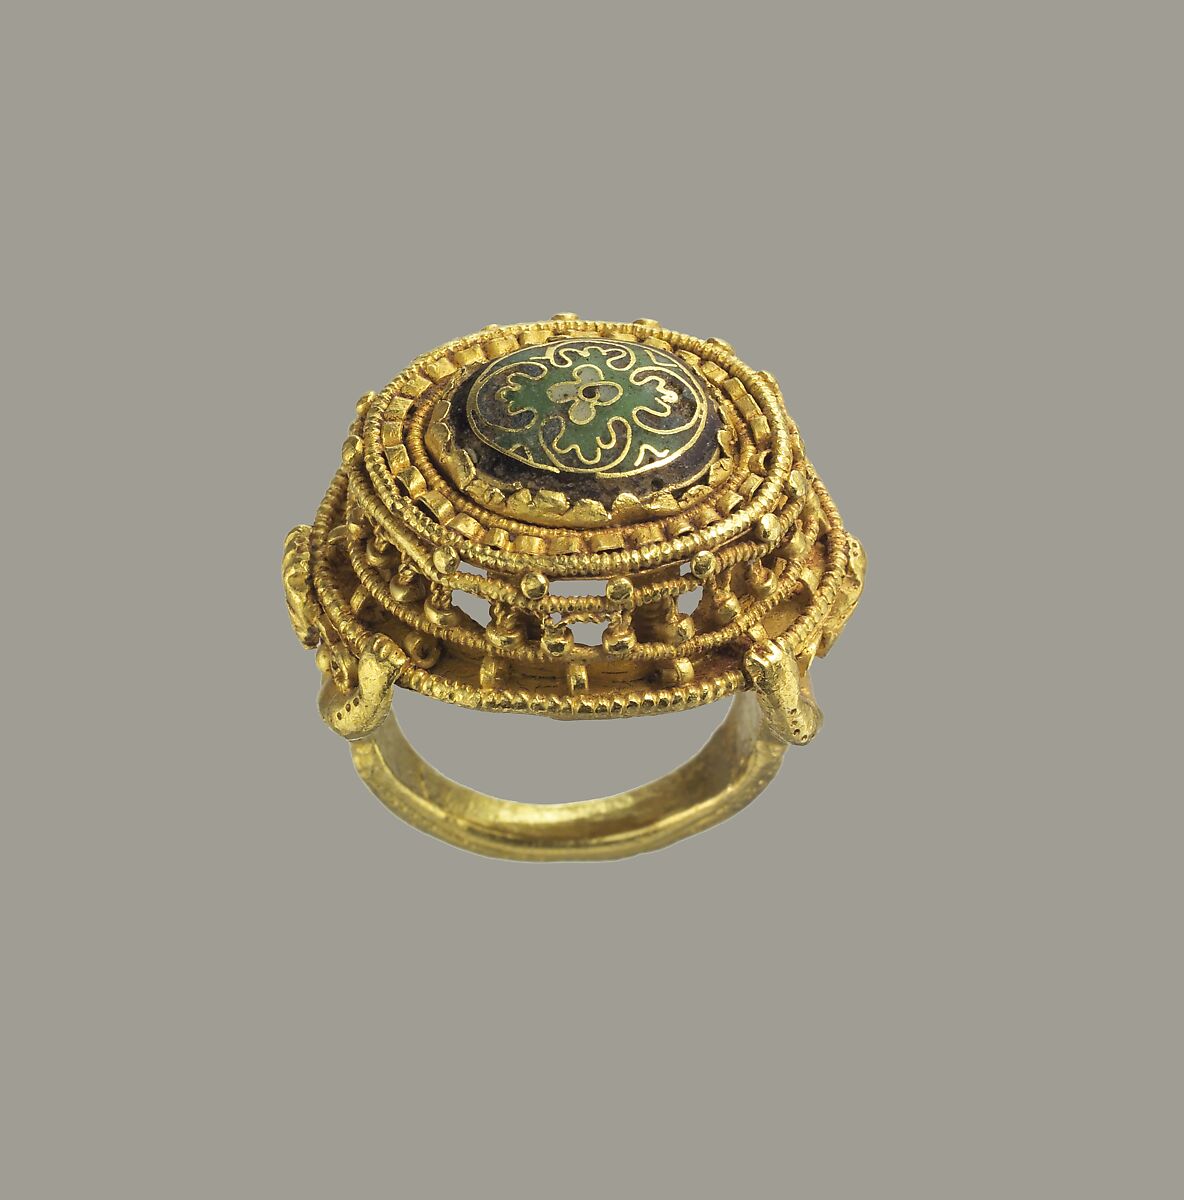 Ring, Gold with cloisonné enamel, German 